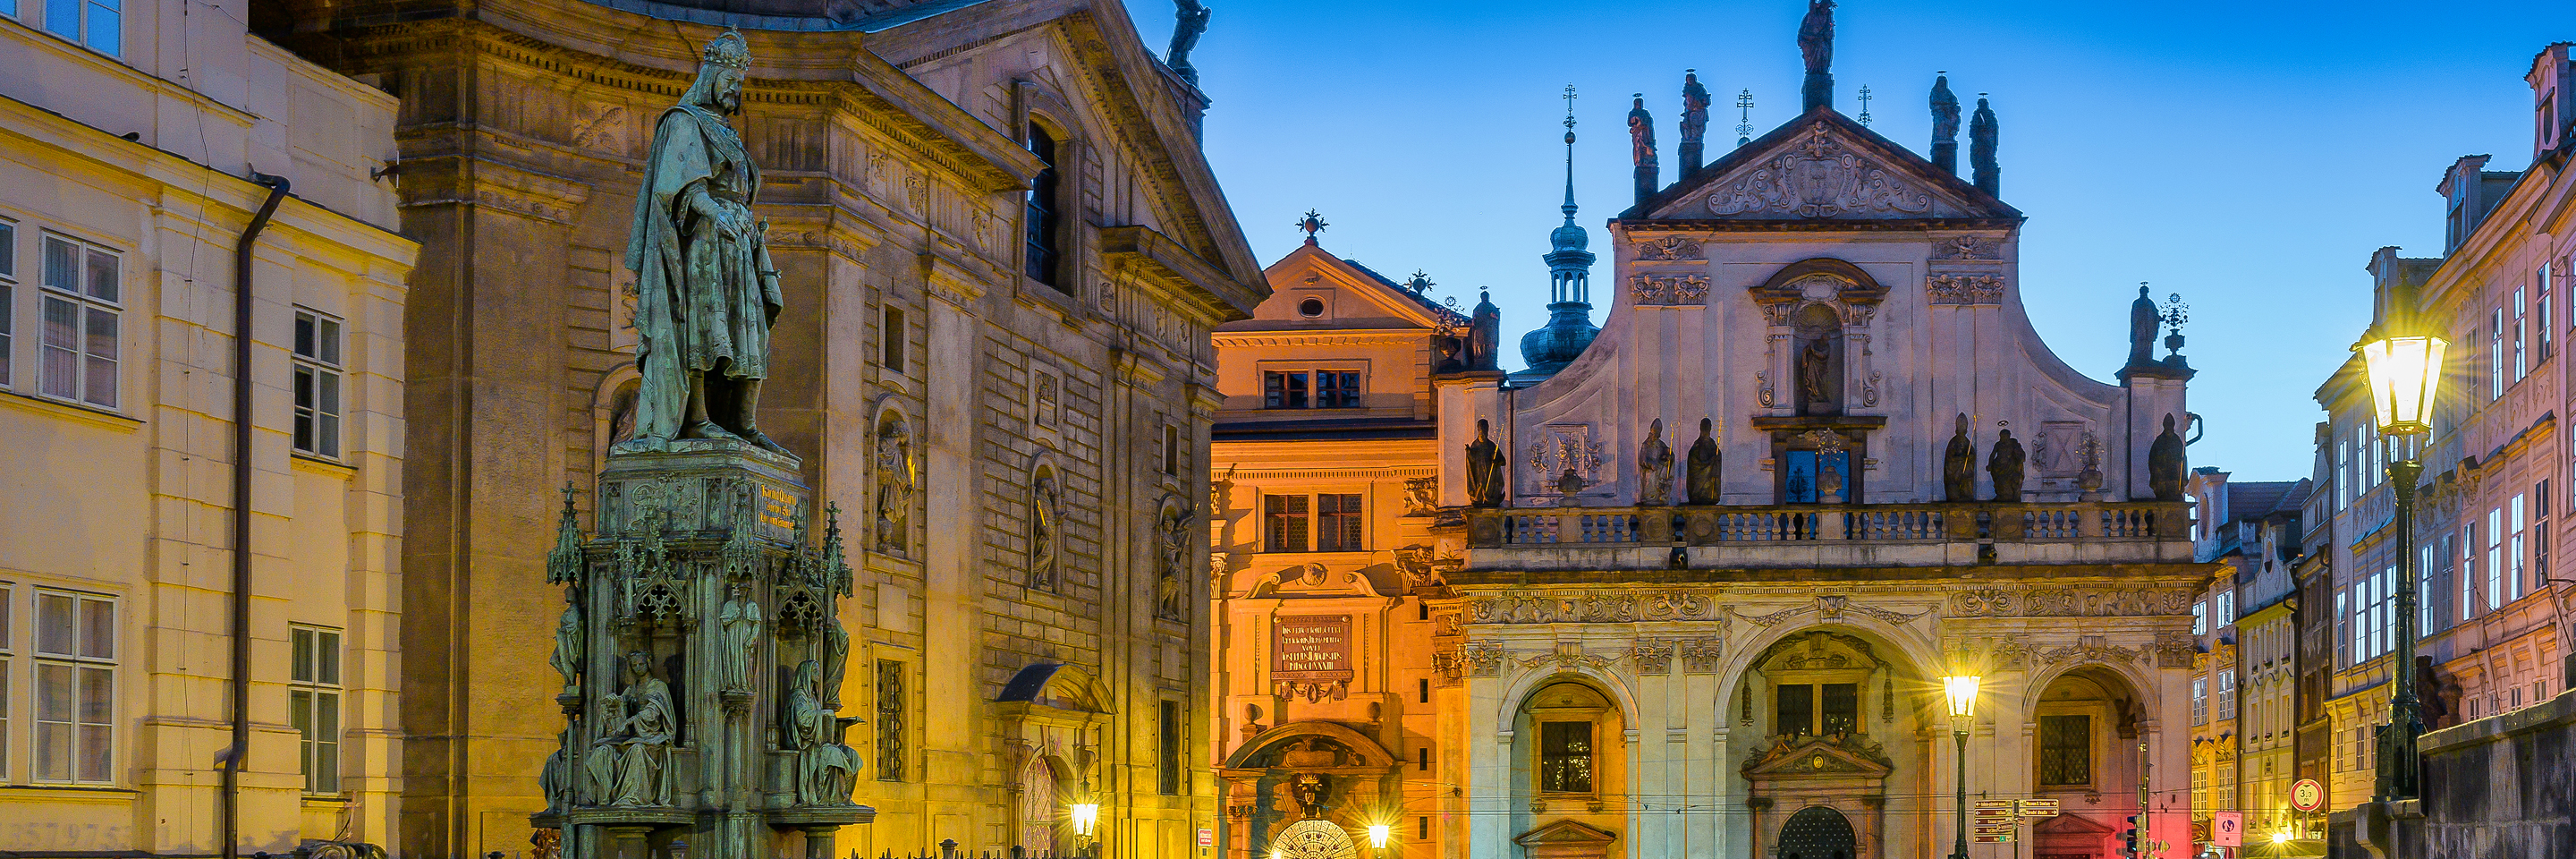 The Danube from the Black Sea to Germany with 2 Nights in Transylvania & 2 Nights in Prague